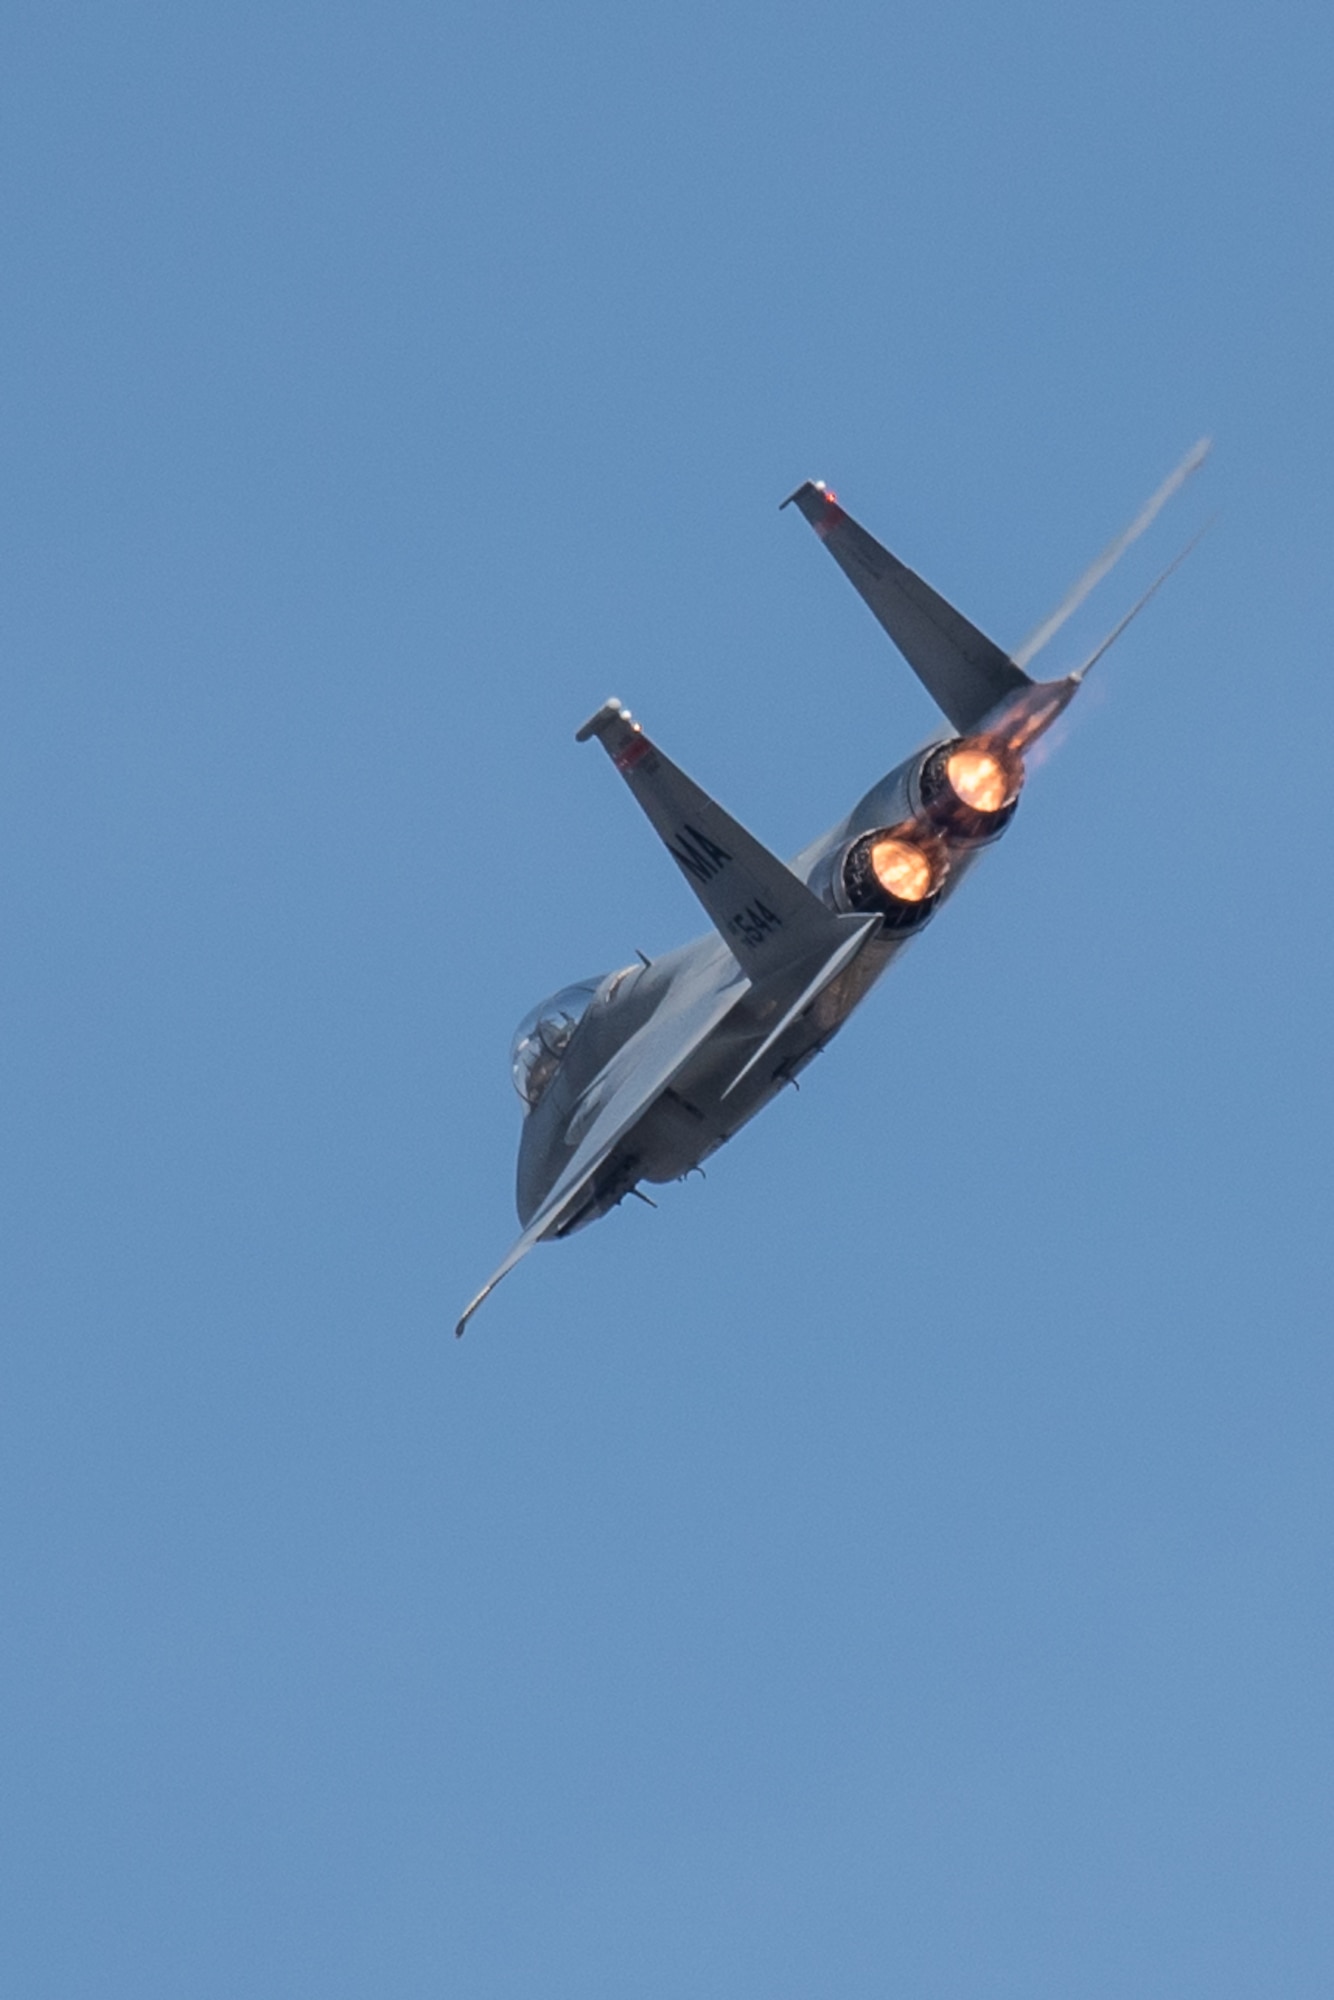 An F-15 Eagle from the 104th Fighter Wing, Massachusetts Air National Guard, performs an aerial demonstration April 21, 2018, during the Thunder Over Louisville air show in Louisville, Ky. The Kentucky Air National Guard once again served as the base of operations for military aircraft participating in the show, providing essential maintenance and logistical support. (U.S. Air National Guard photo by Lt. Col. Dale Greer)